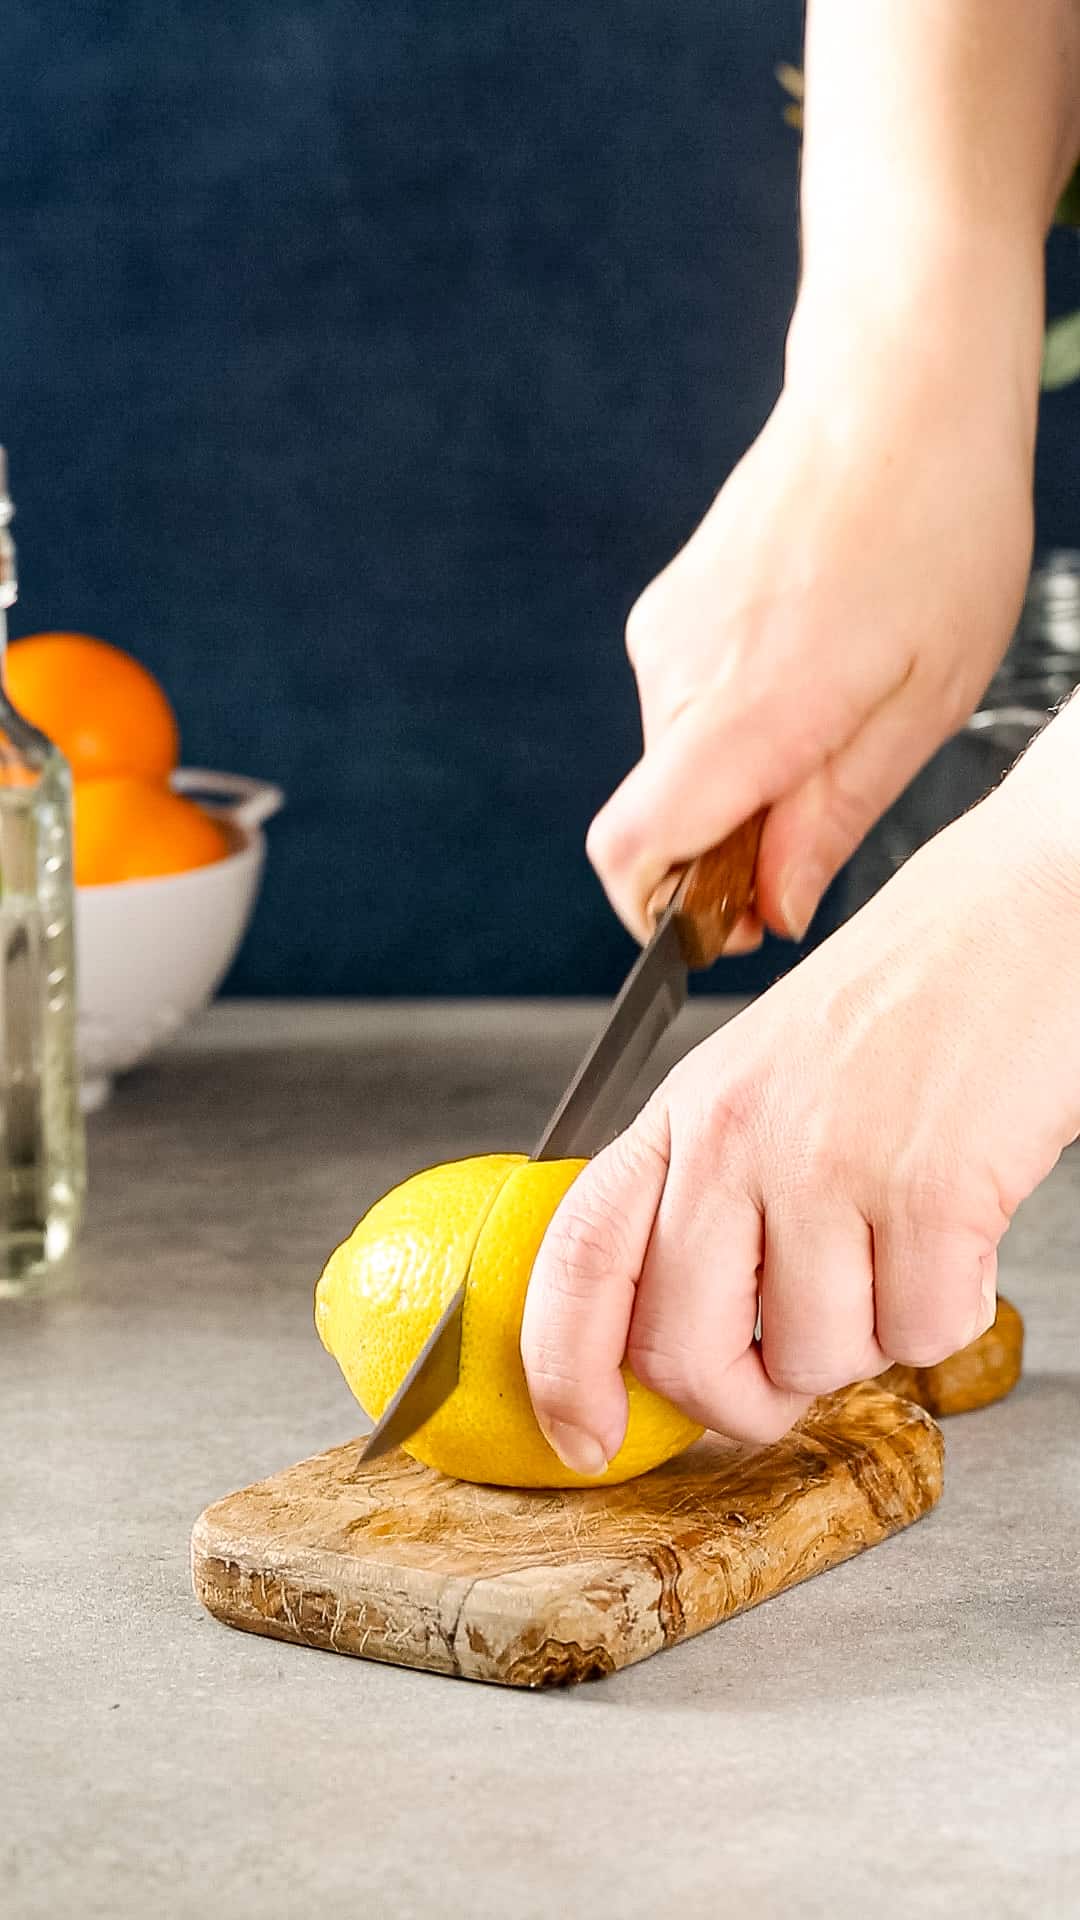 Hands cutting a lemon on a small wooden cutting board.